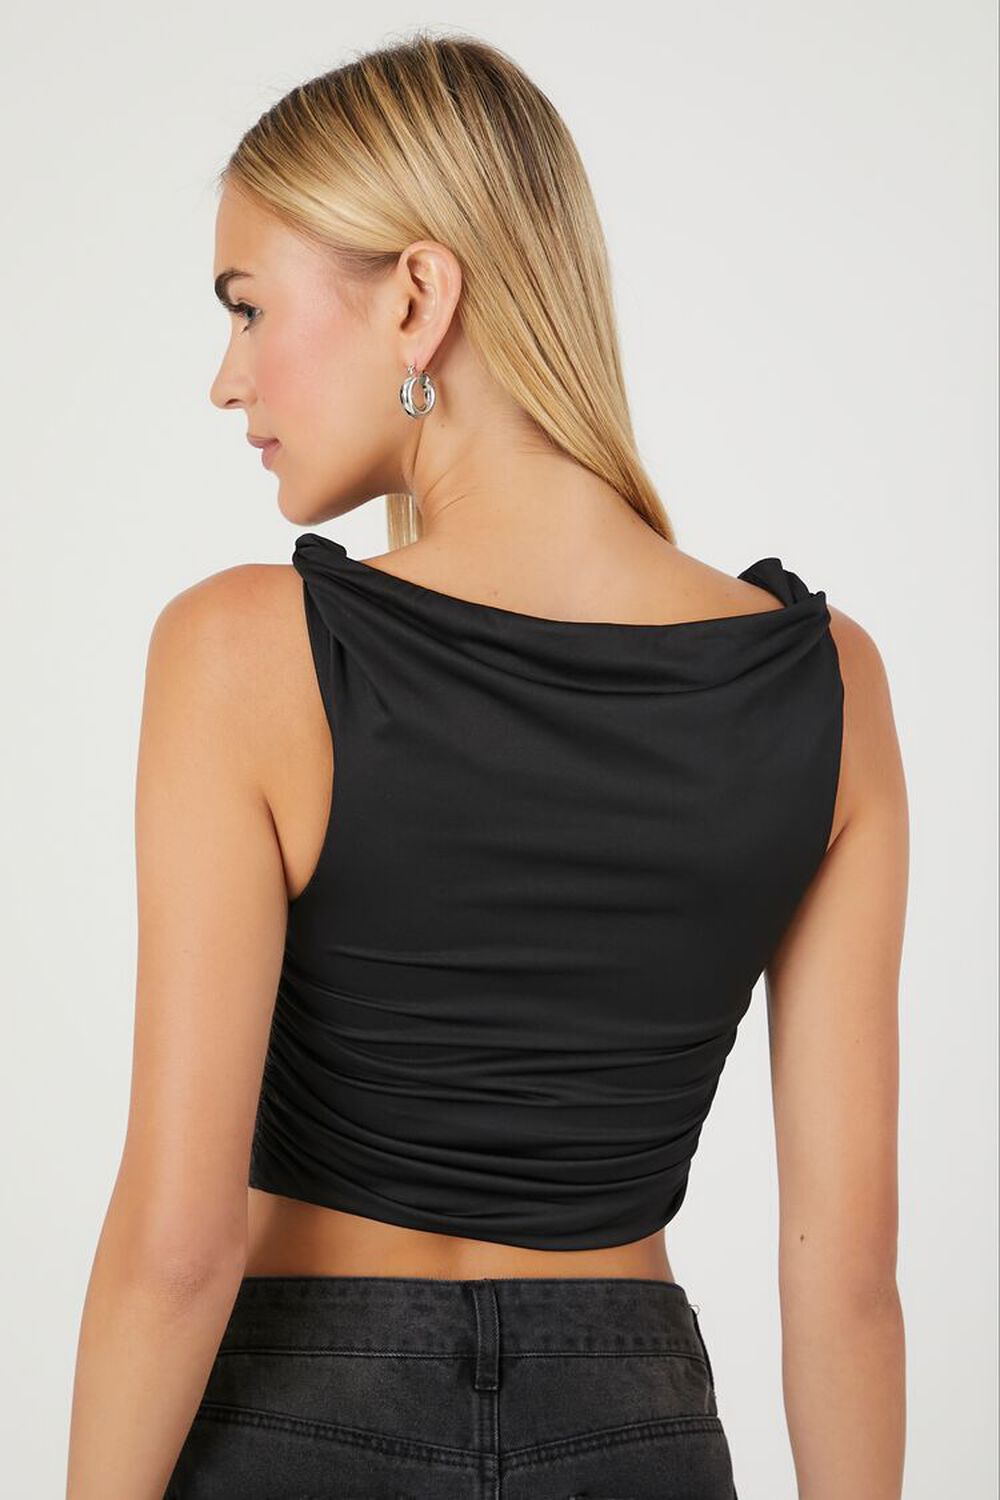 Forever21 Knotted Crop T-Shirt - Black